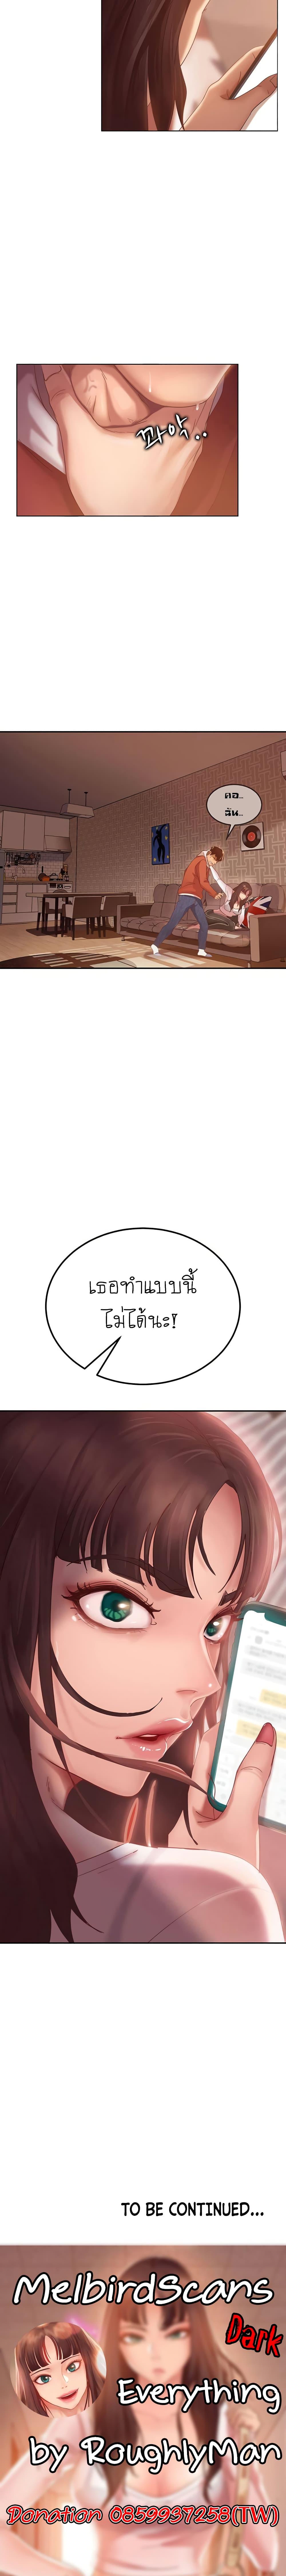 A Twisted Day 1 ภาพ 29